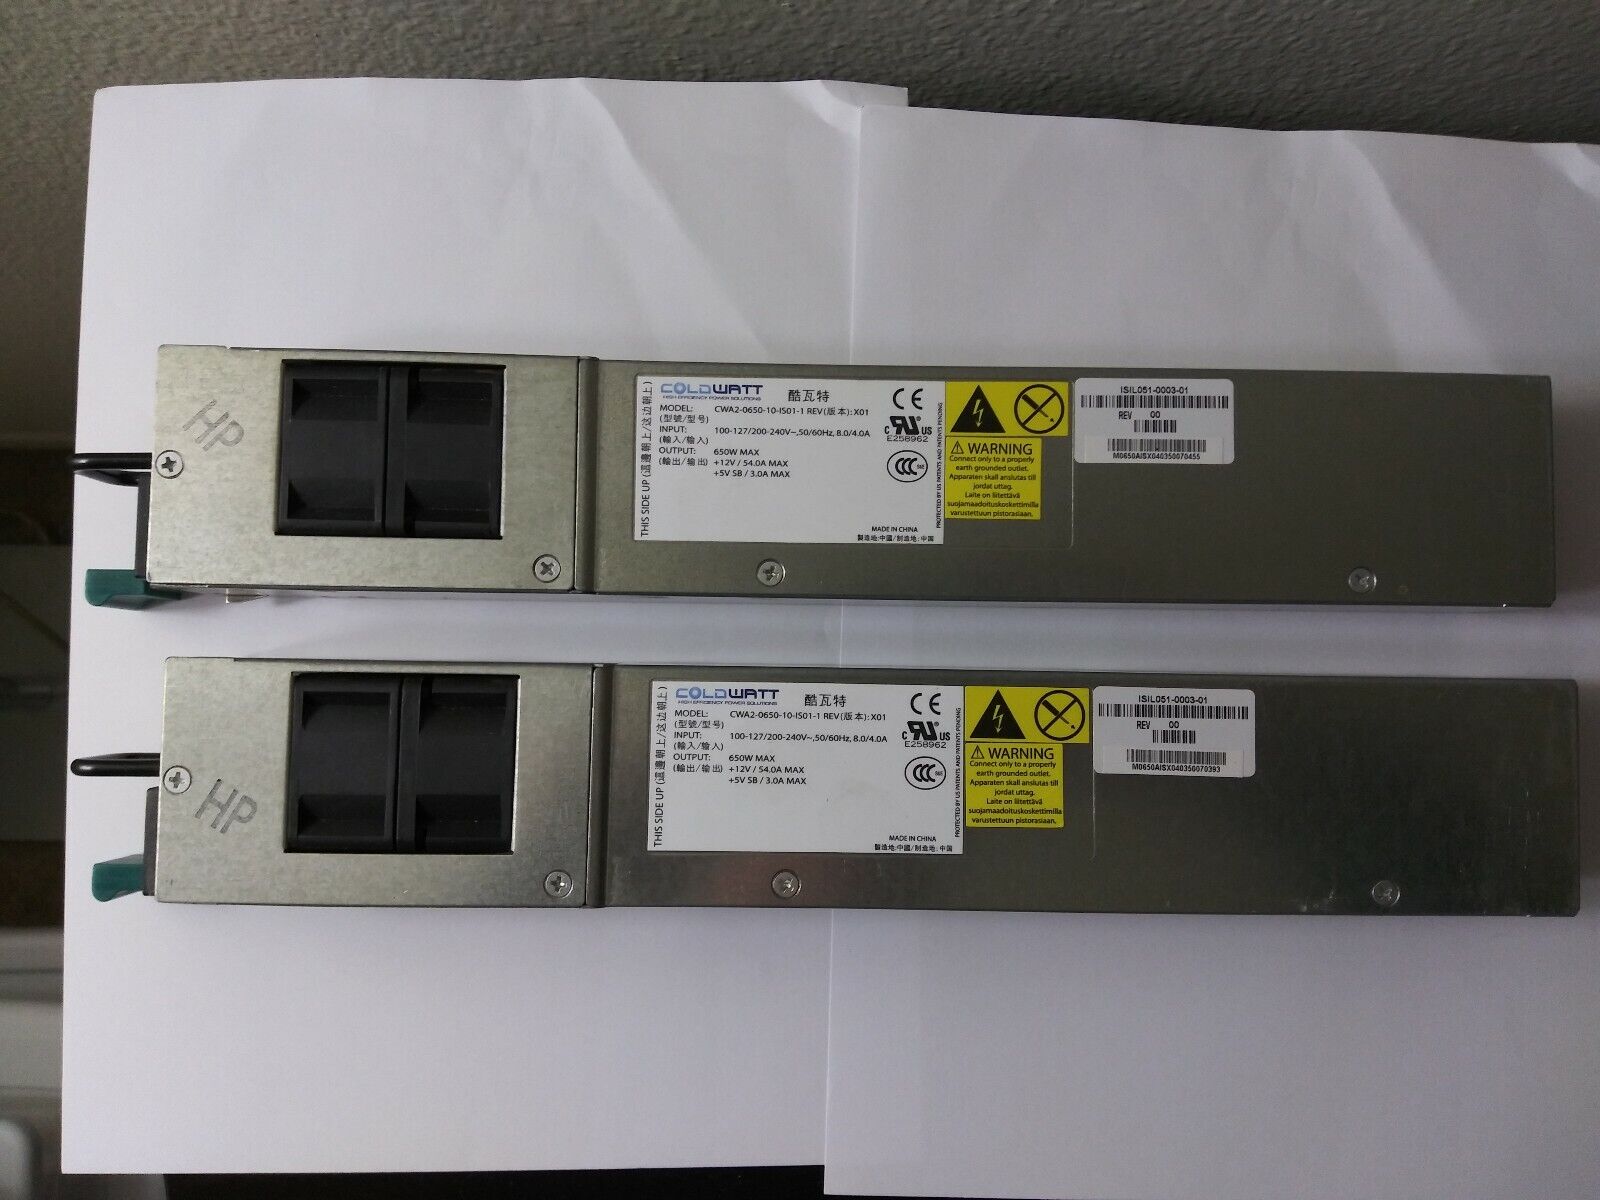 Lot of 2 Power Supply For Coldwatt CWA2-0650-10-IS01-1 650Watts ISIL051-0003-01